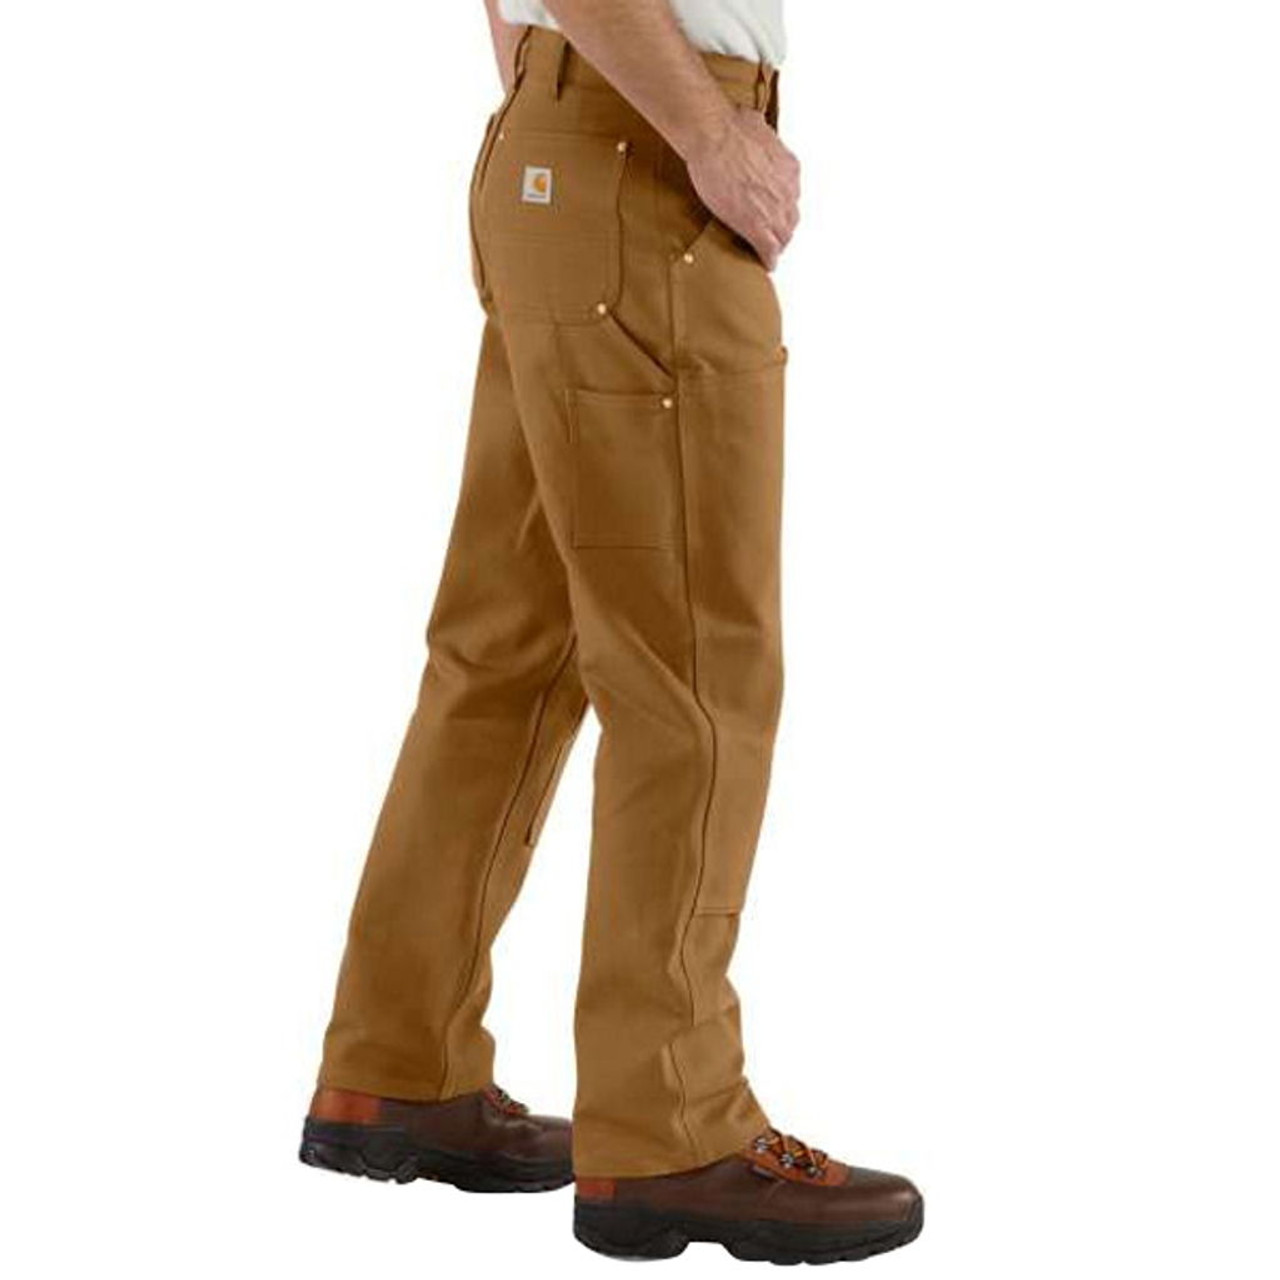 carhartt double front dungarees pants｜TikTok Search